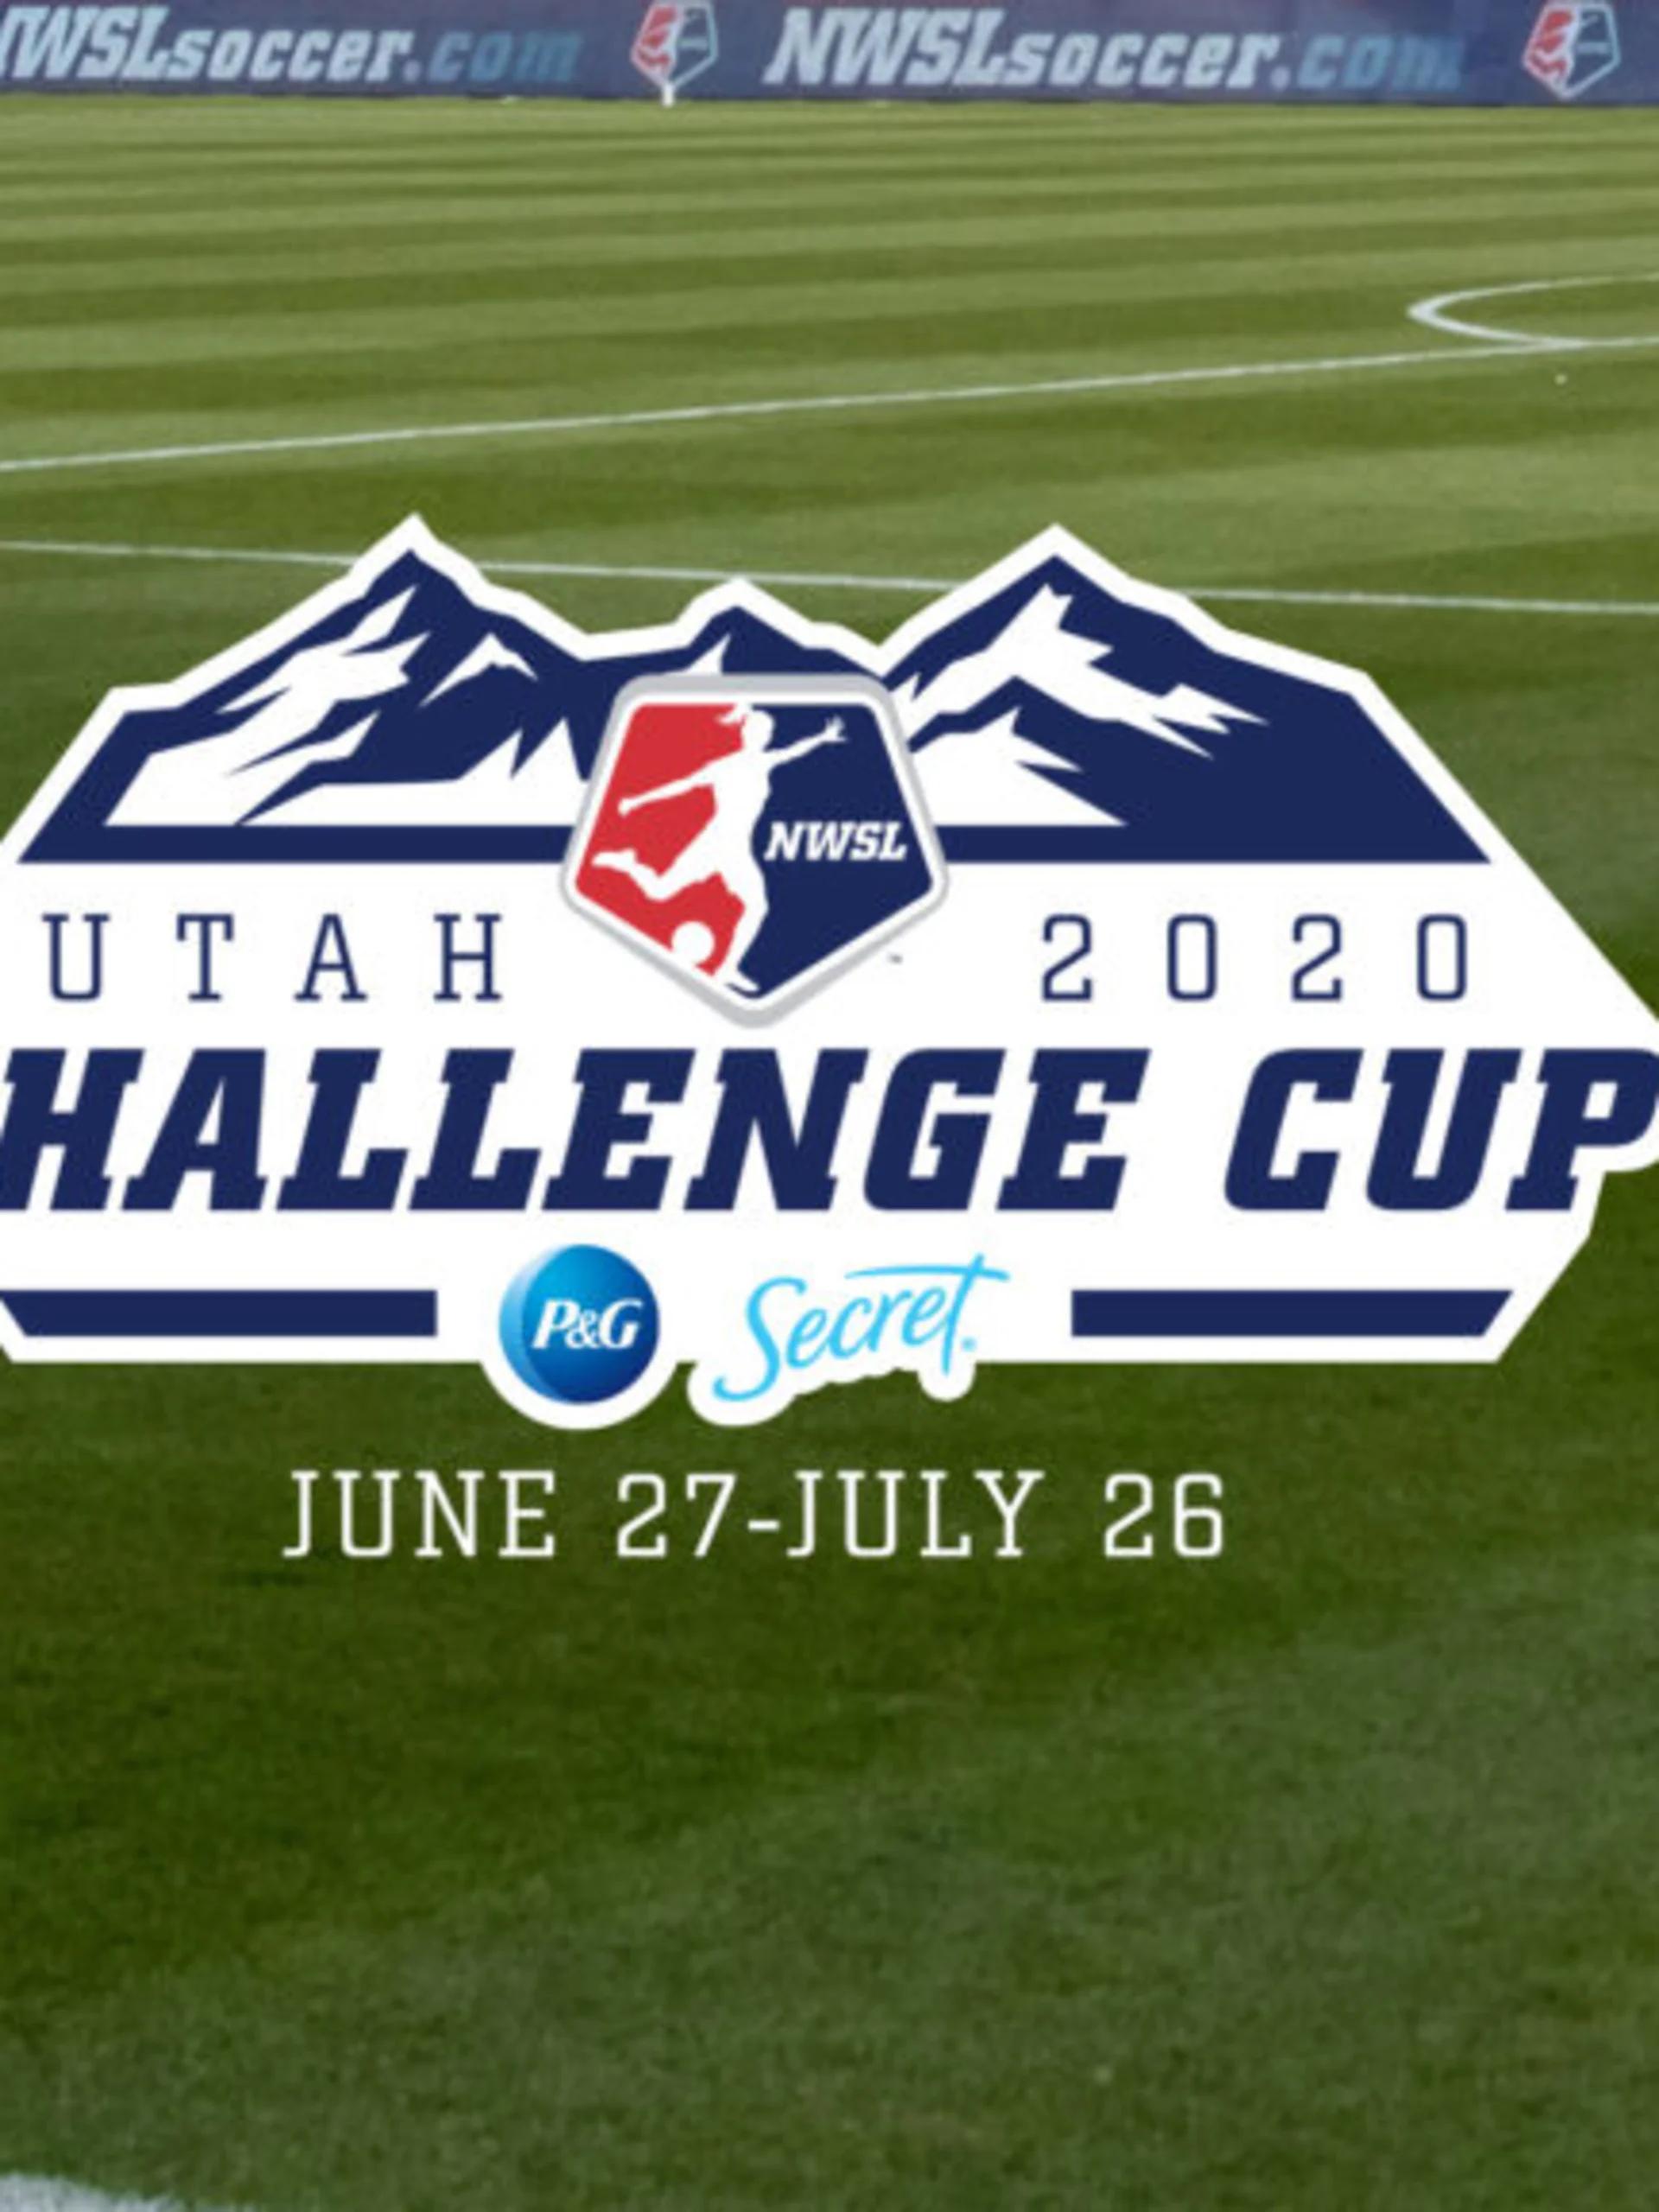 story-image-nwsl-reveals-full-preliminary-round-schedule-for-2020-nwsl-challenge-cup